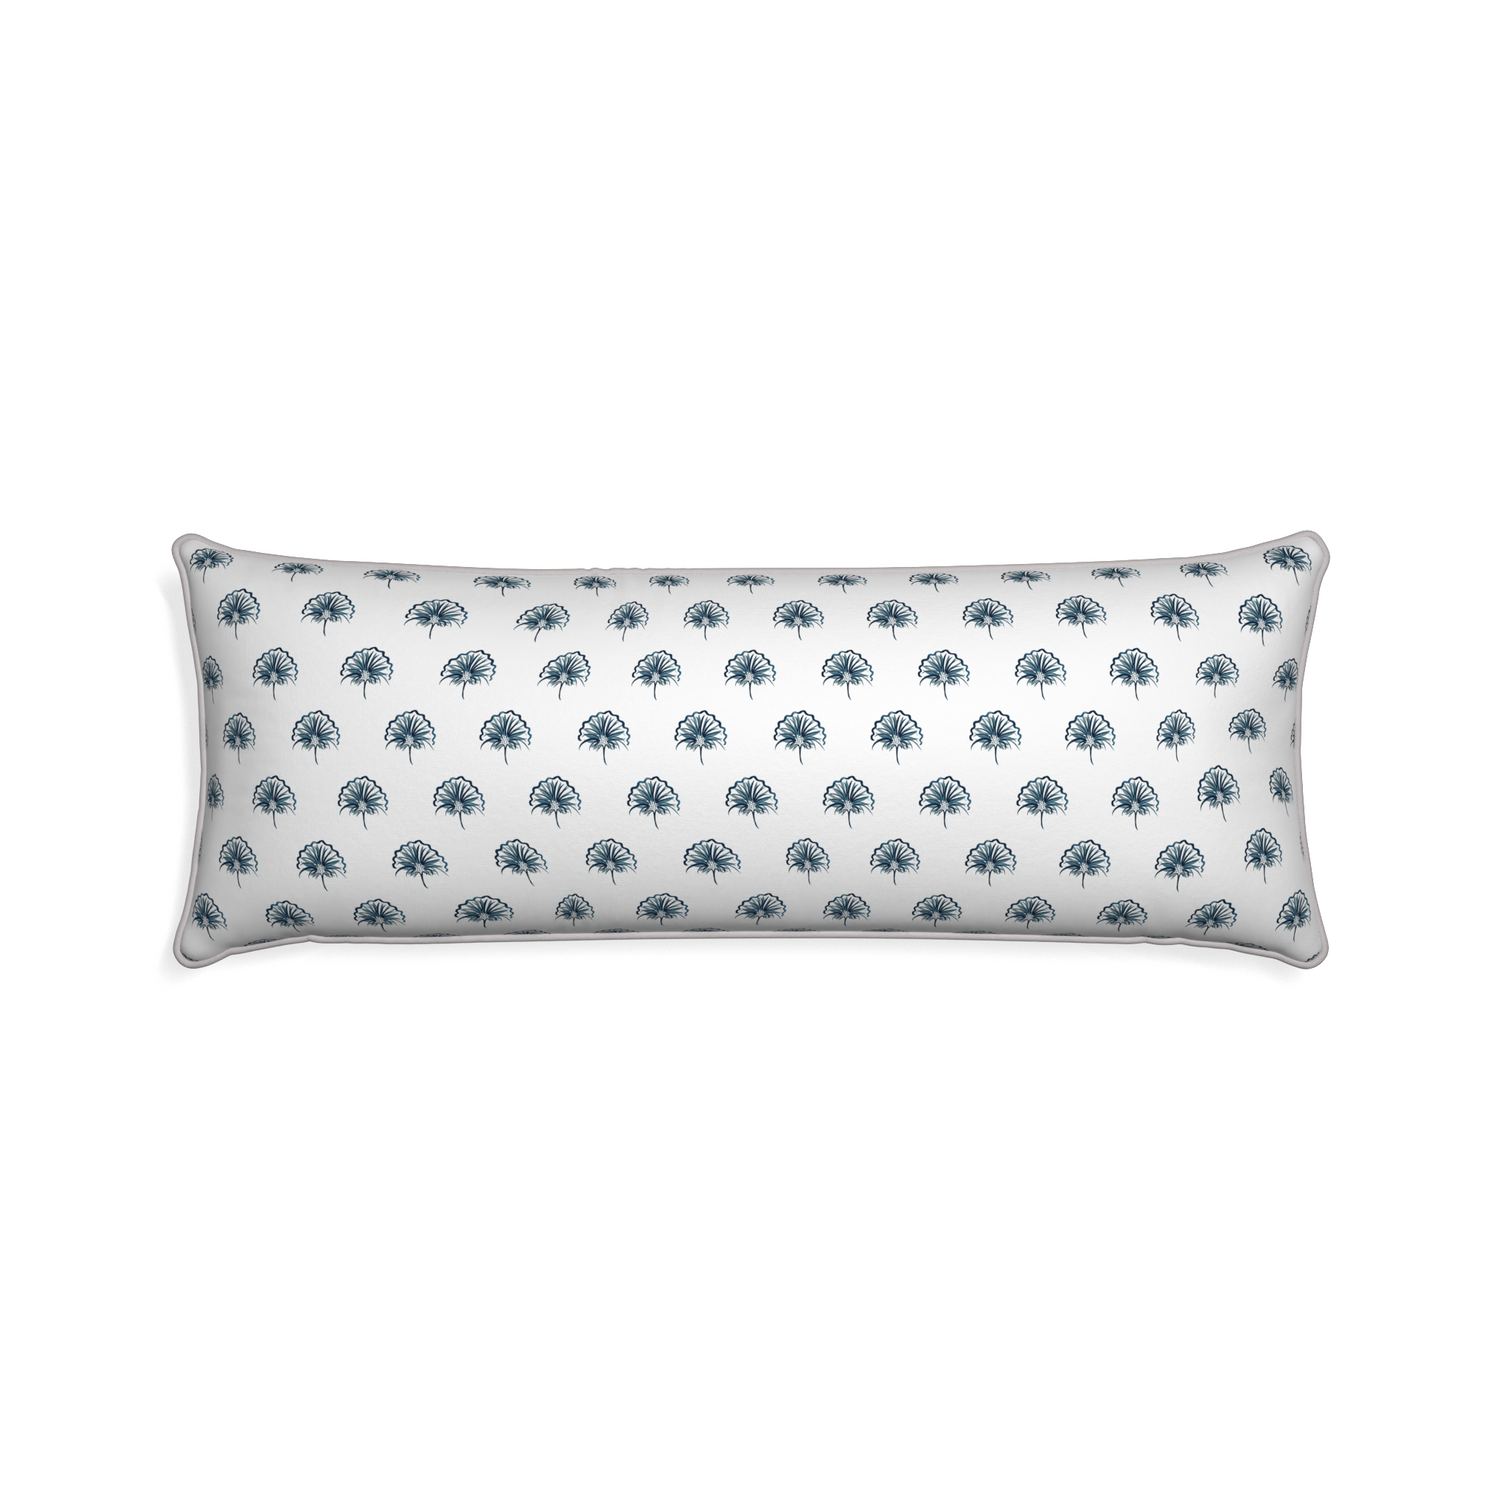 Xl-lumbar penelope midnight custom floral navypillow with pebble piping on white background